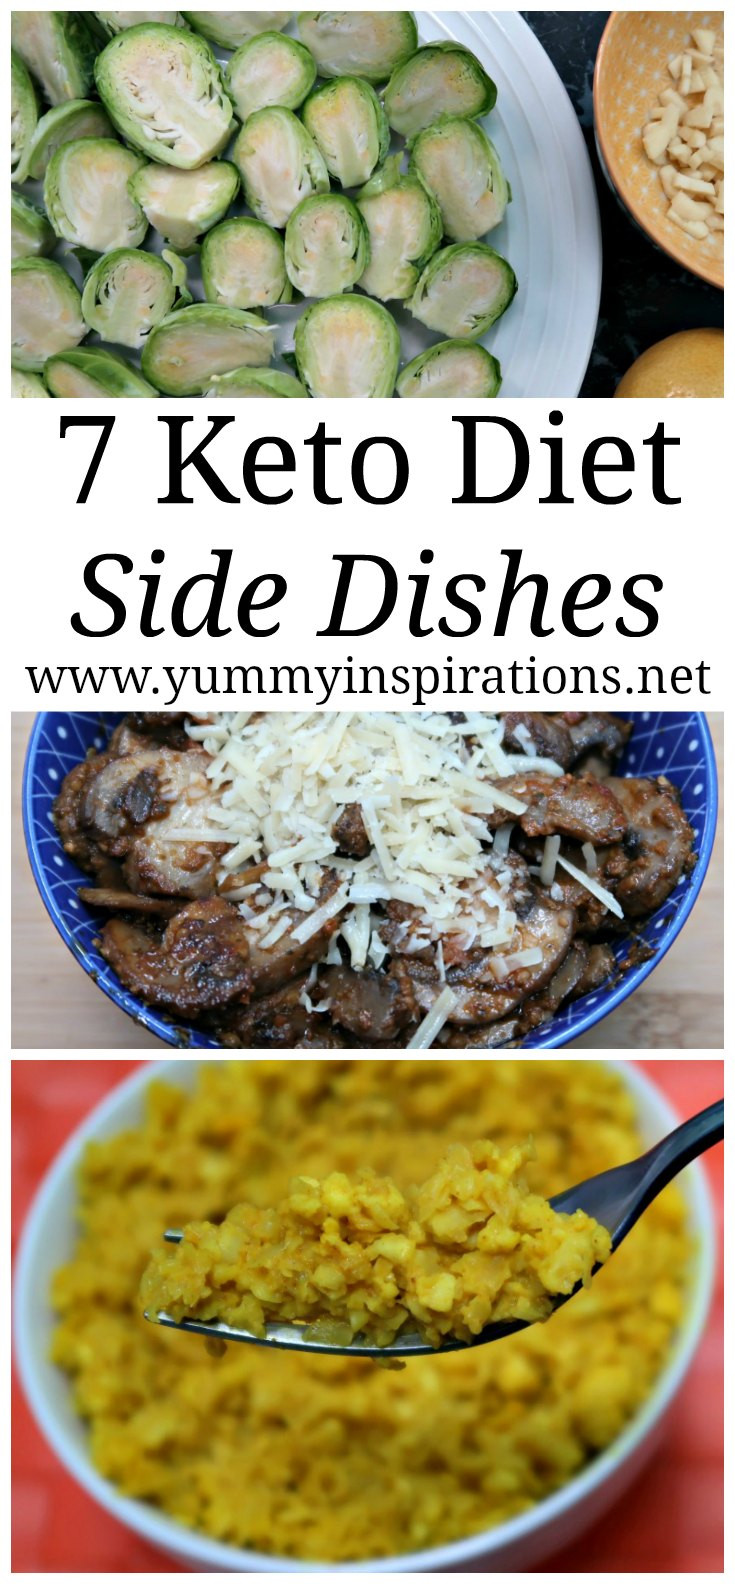 Easy Low Carb Side Dishes
 7 Keto Side Dishes Easy Low Carb Sides LCHF Recipes